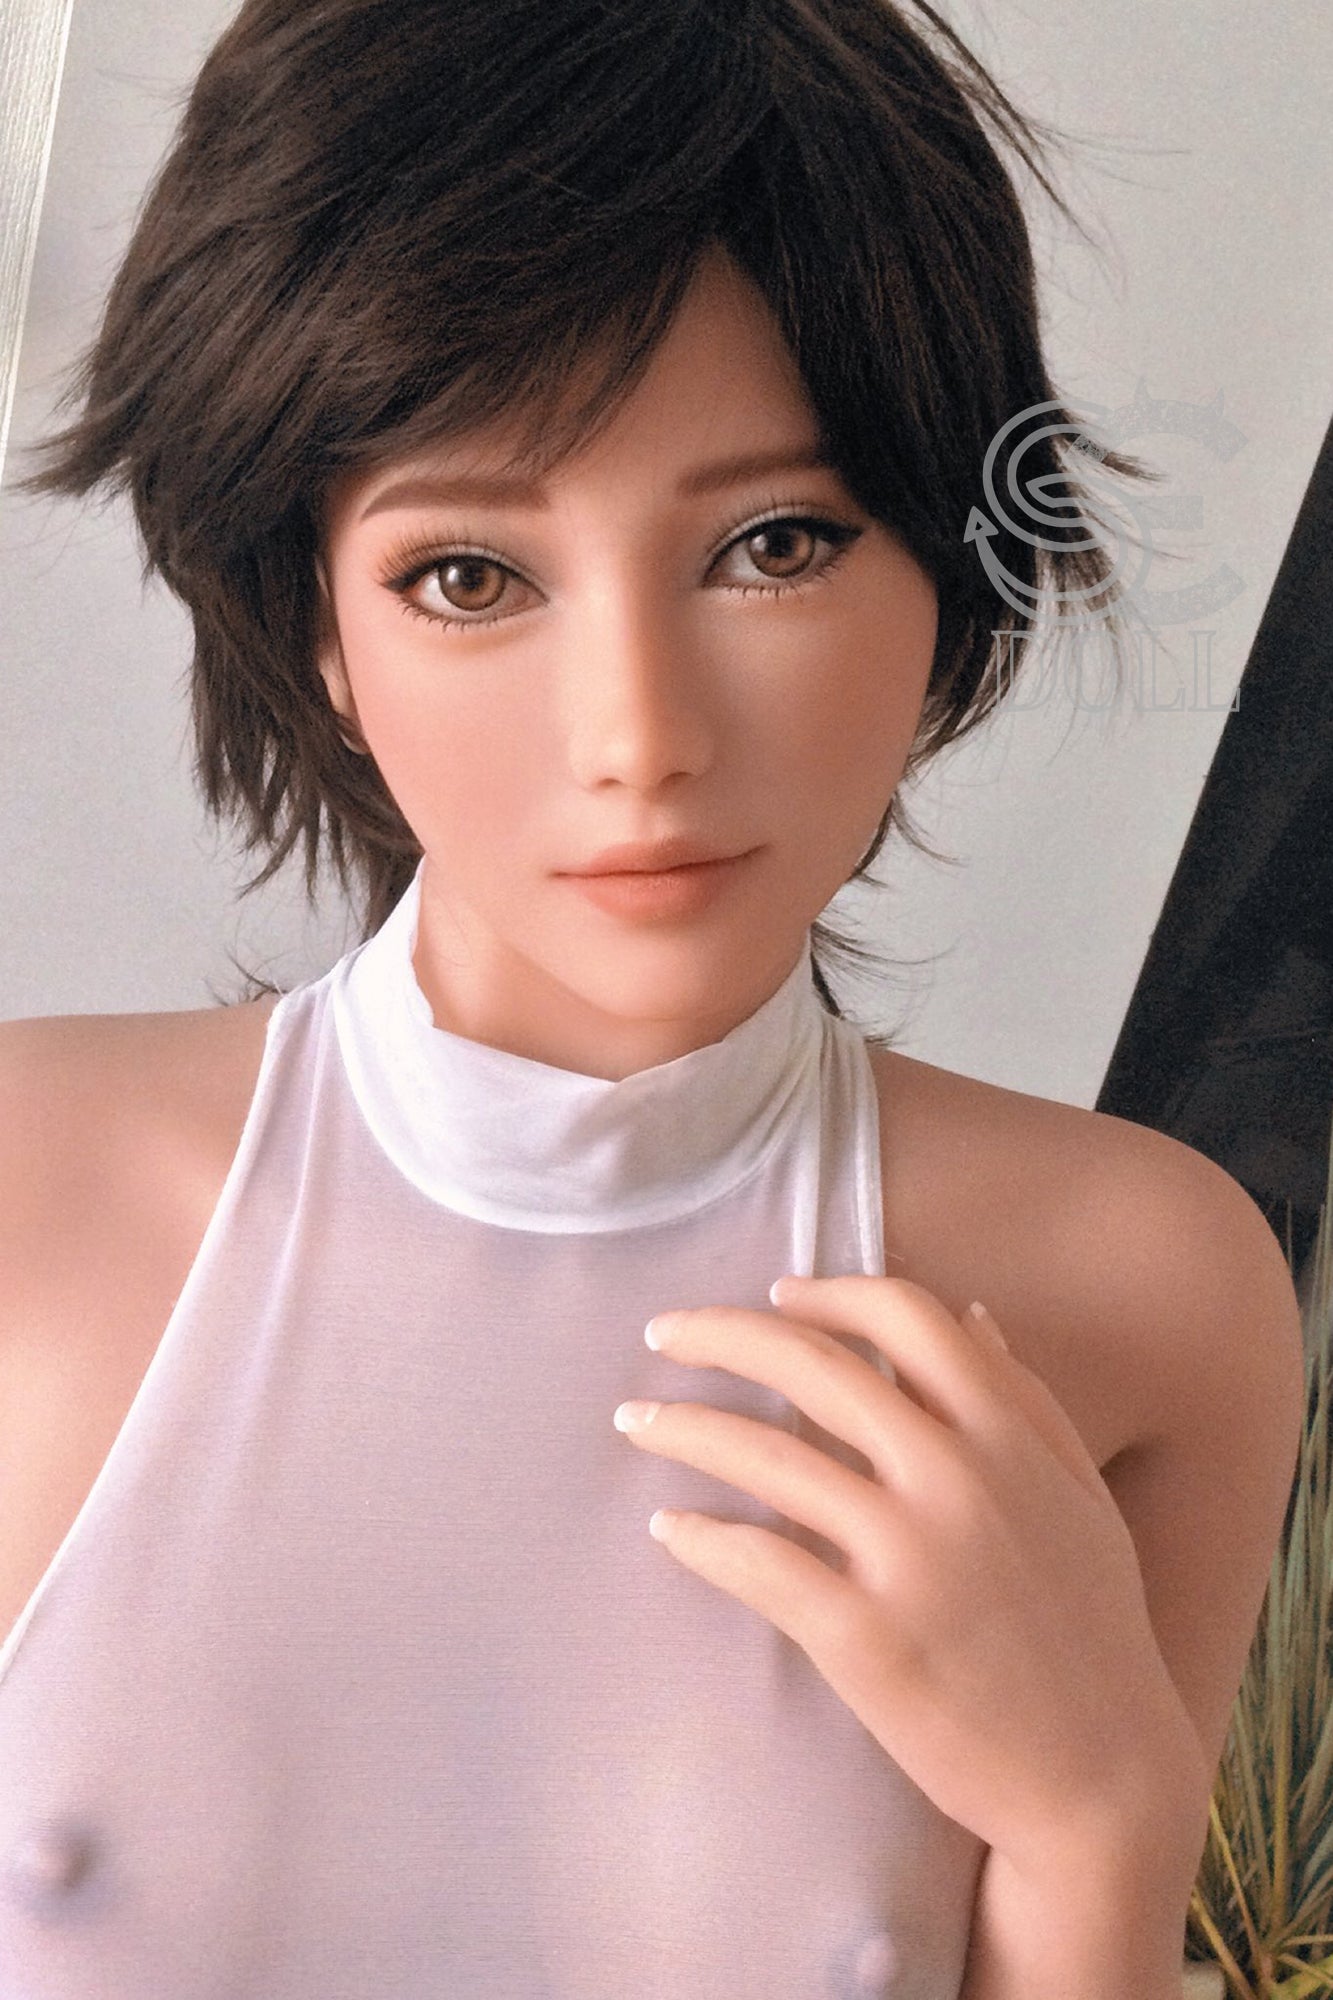 SEDOLL 163 cm E TPE - Jacey | Buy Sex Dolls at DOLLS ACTUALLY